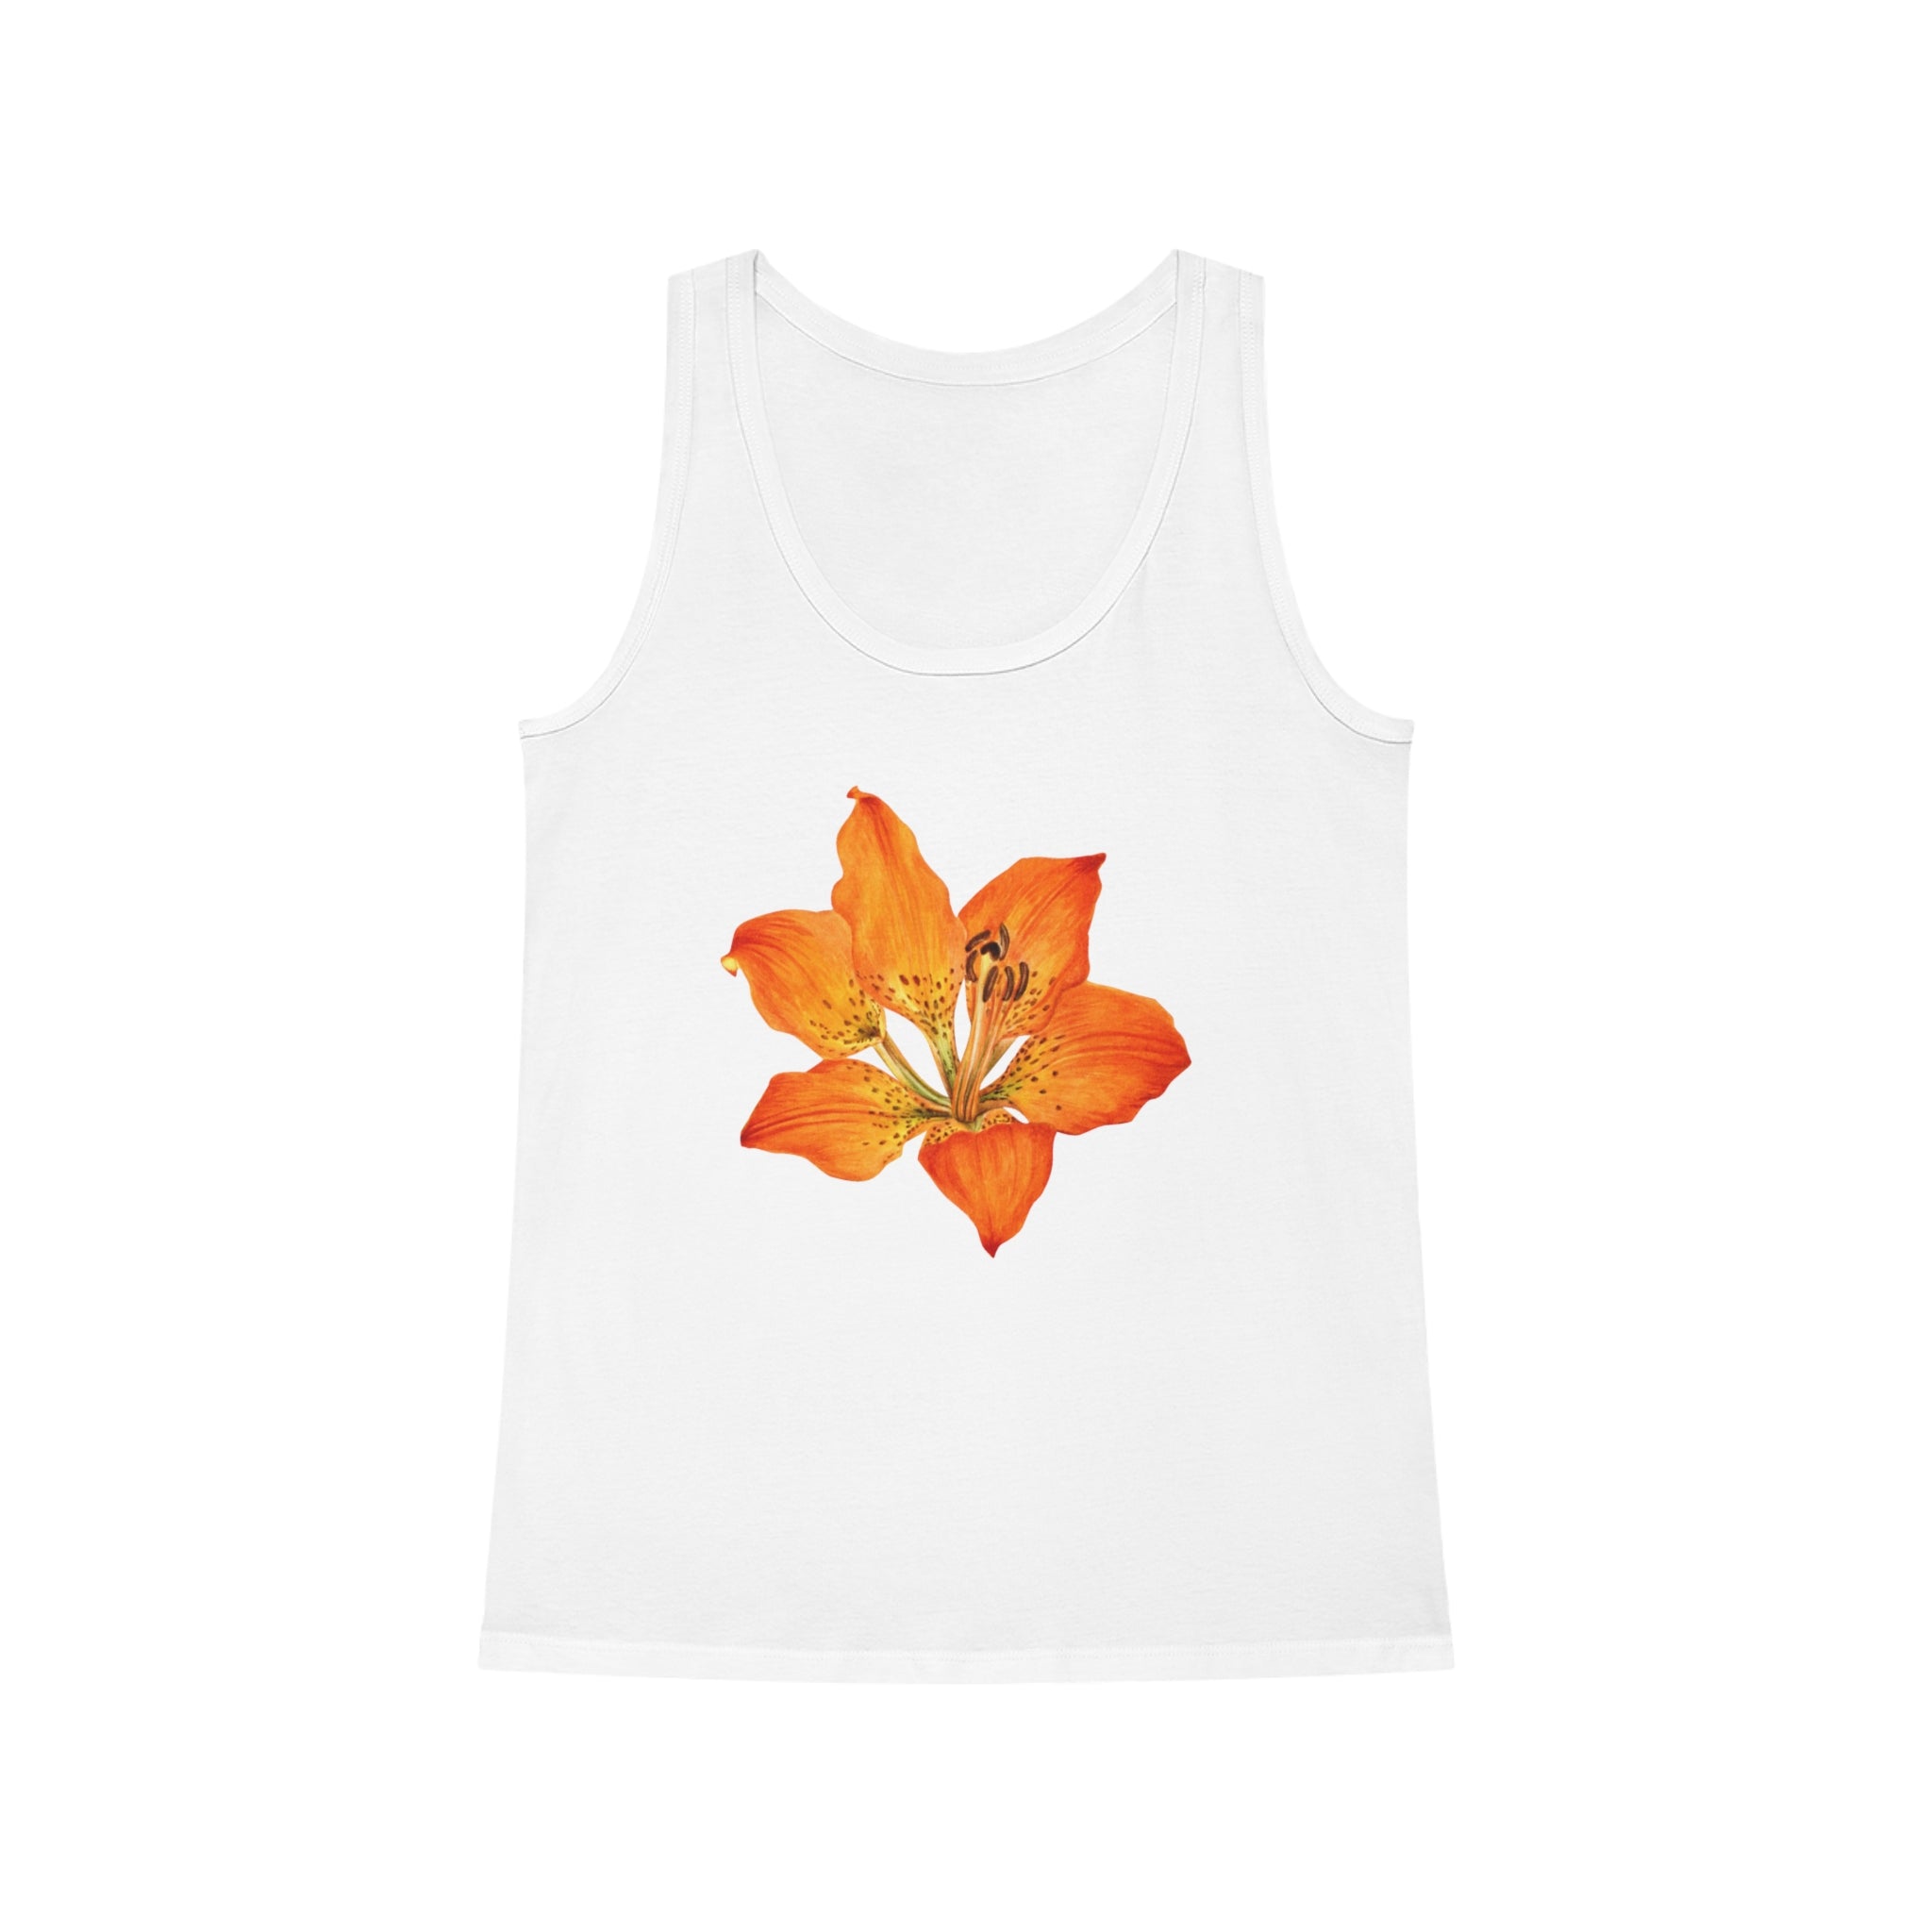 Flower Boom tank top floral print women's tank top made from organic cotton.